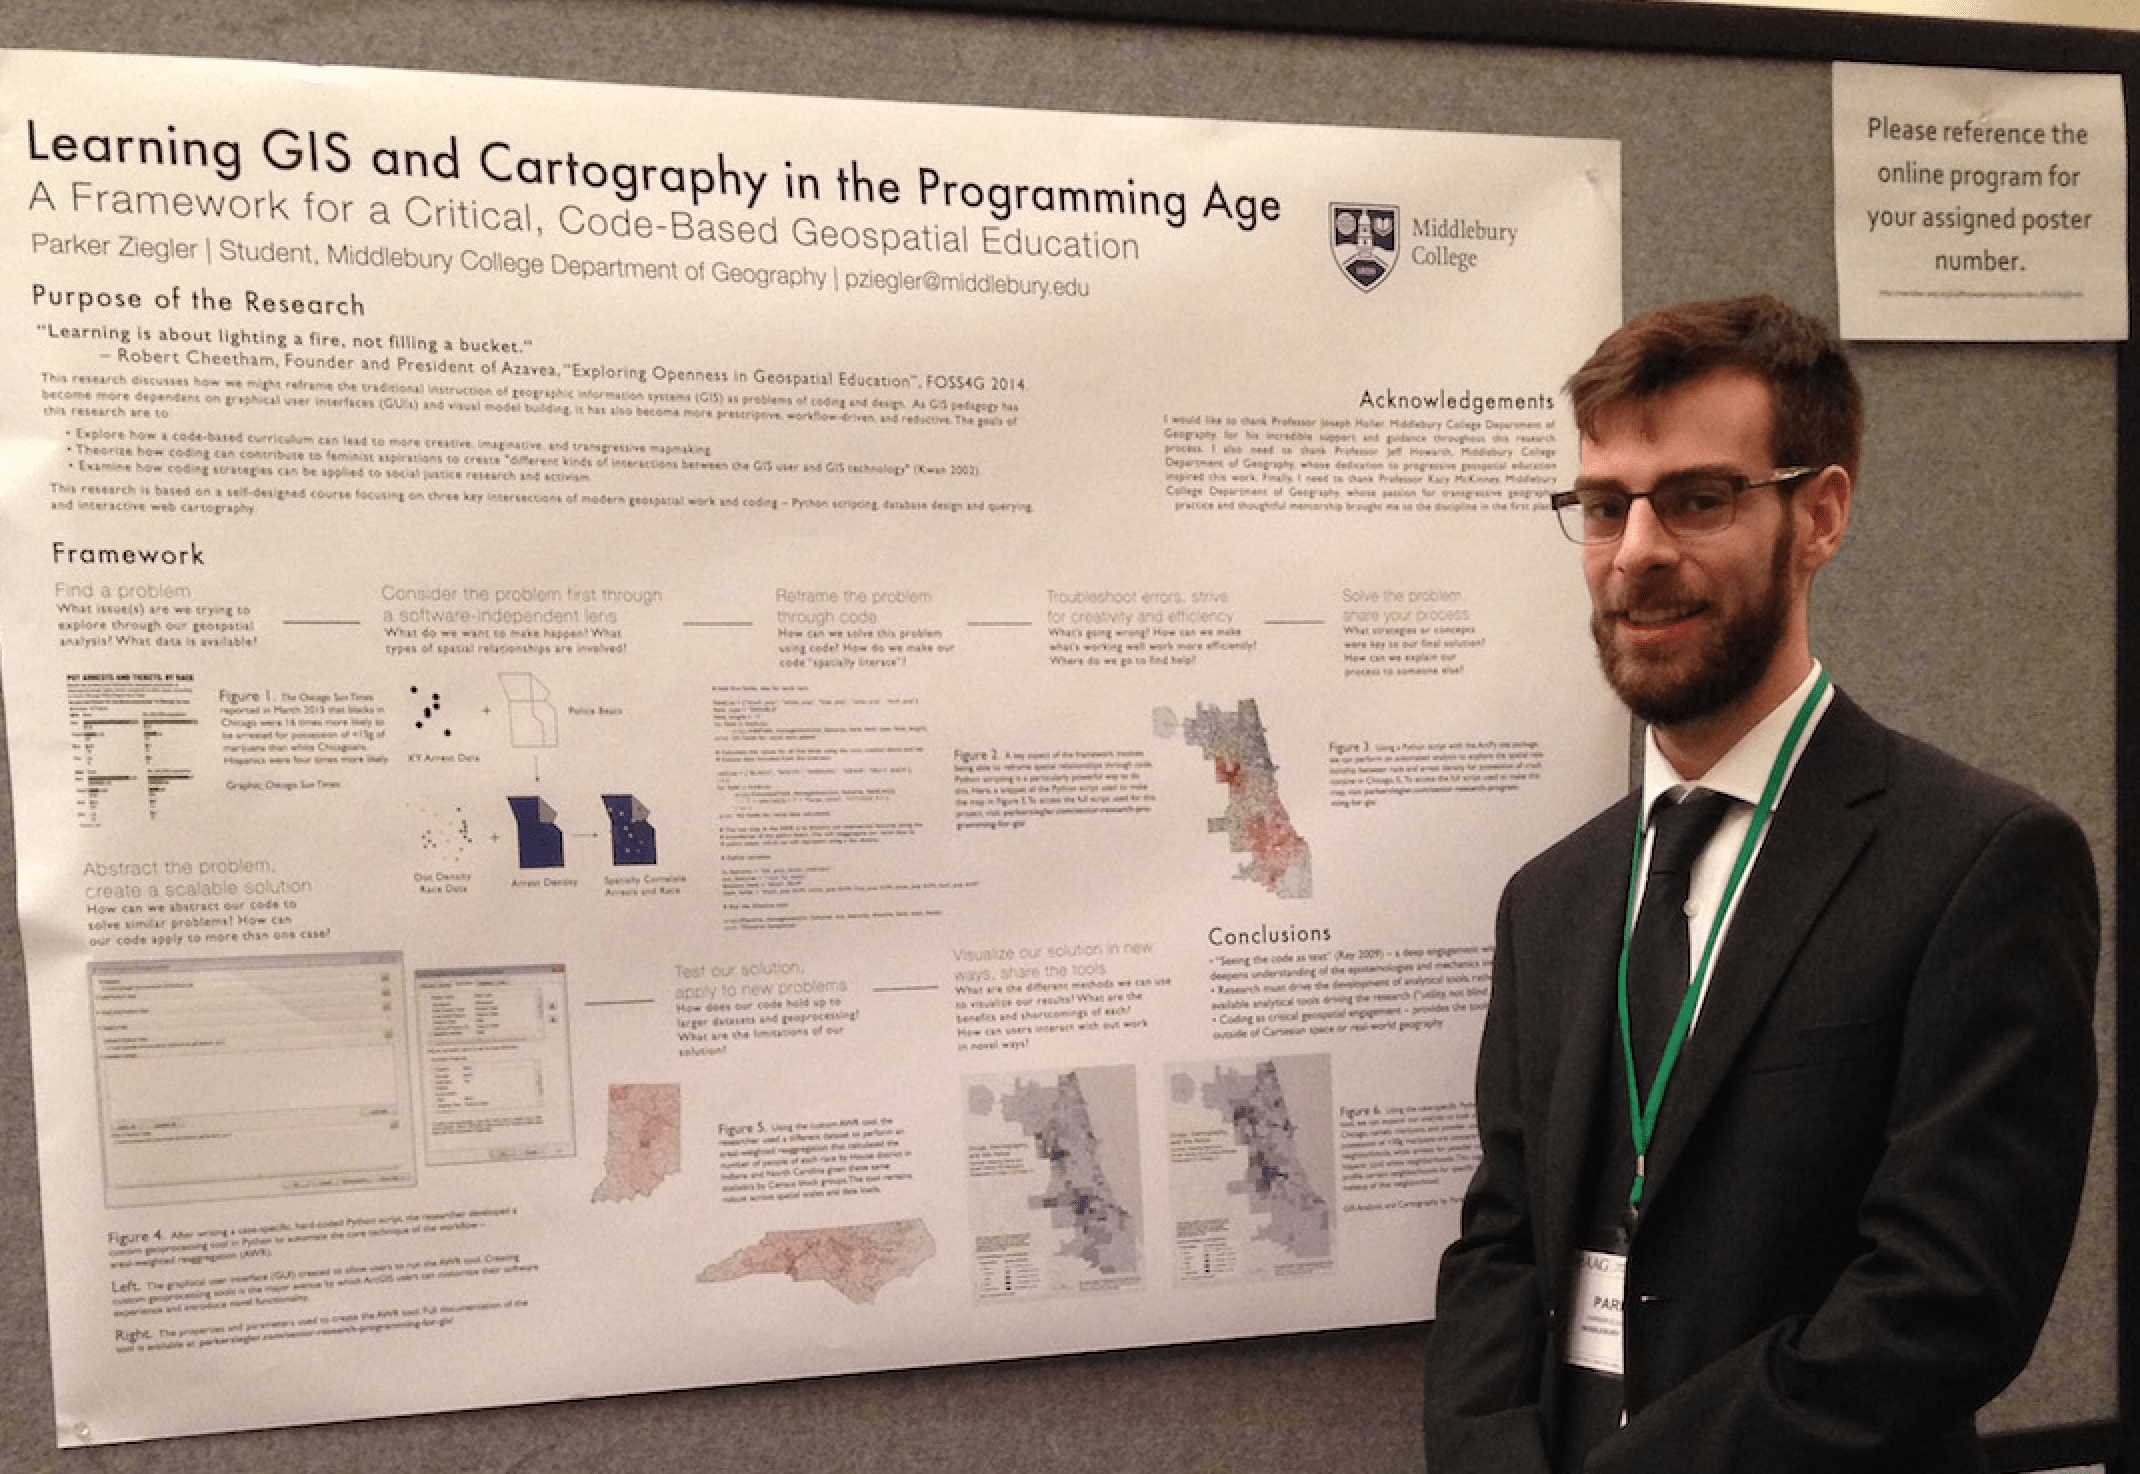 Presenting at AAG 2016 in San Francisco, CA as part of the GIS and Technology Poster Session.